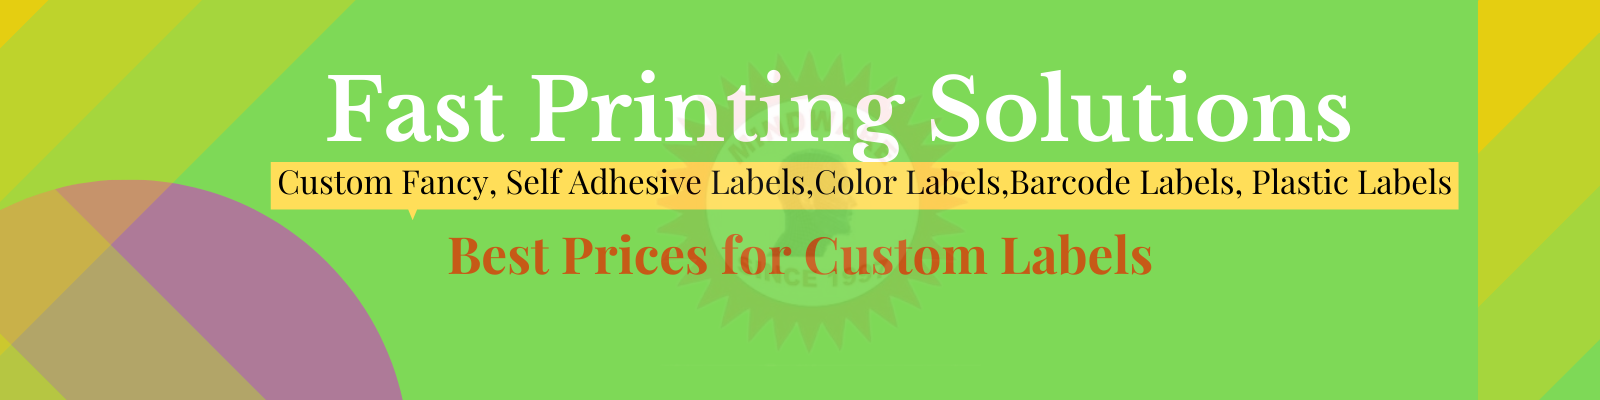 Fast Printing Solutions